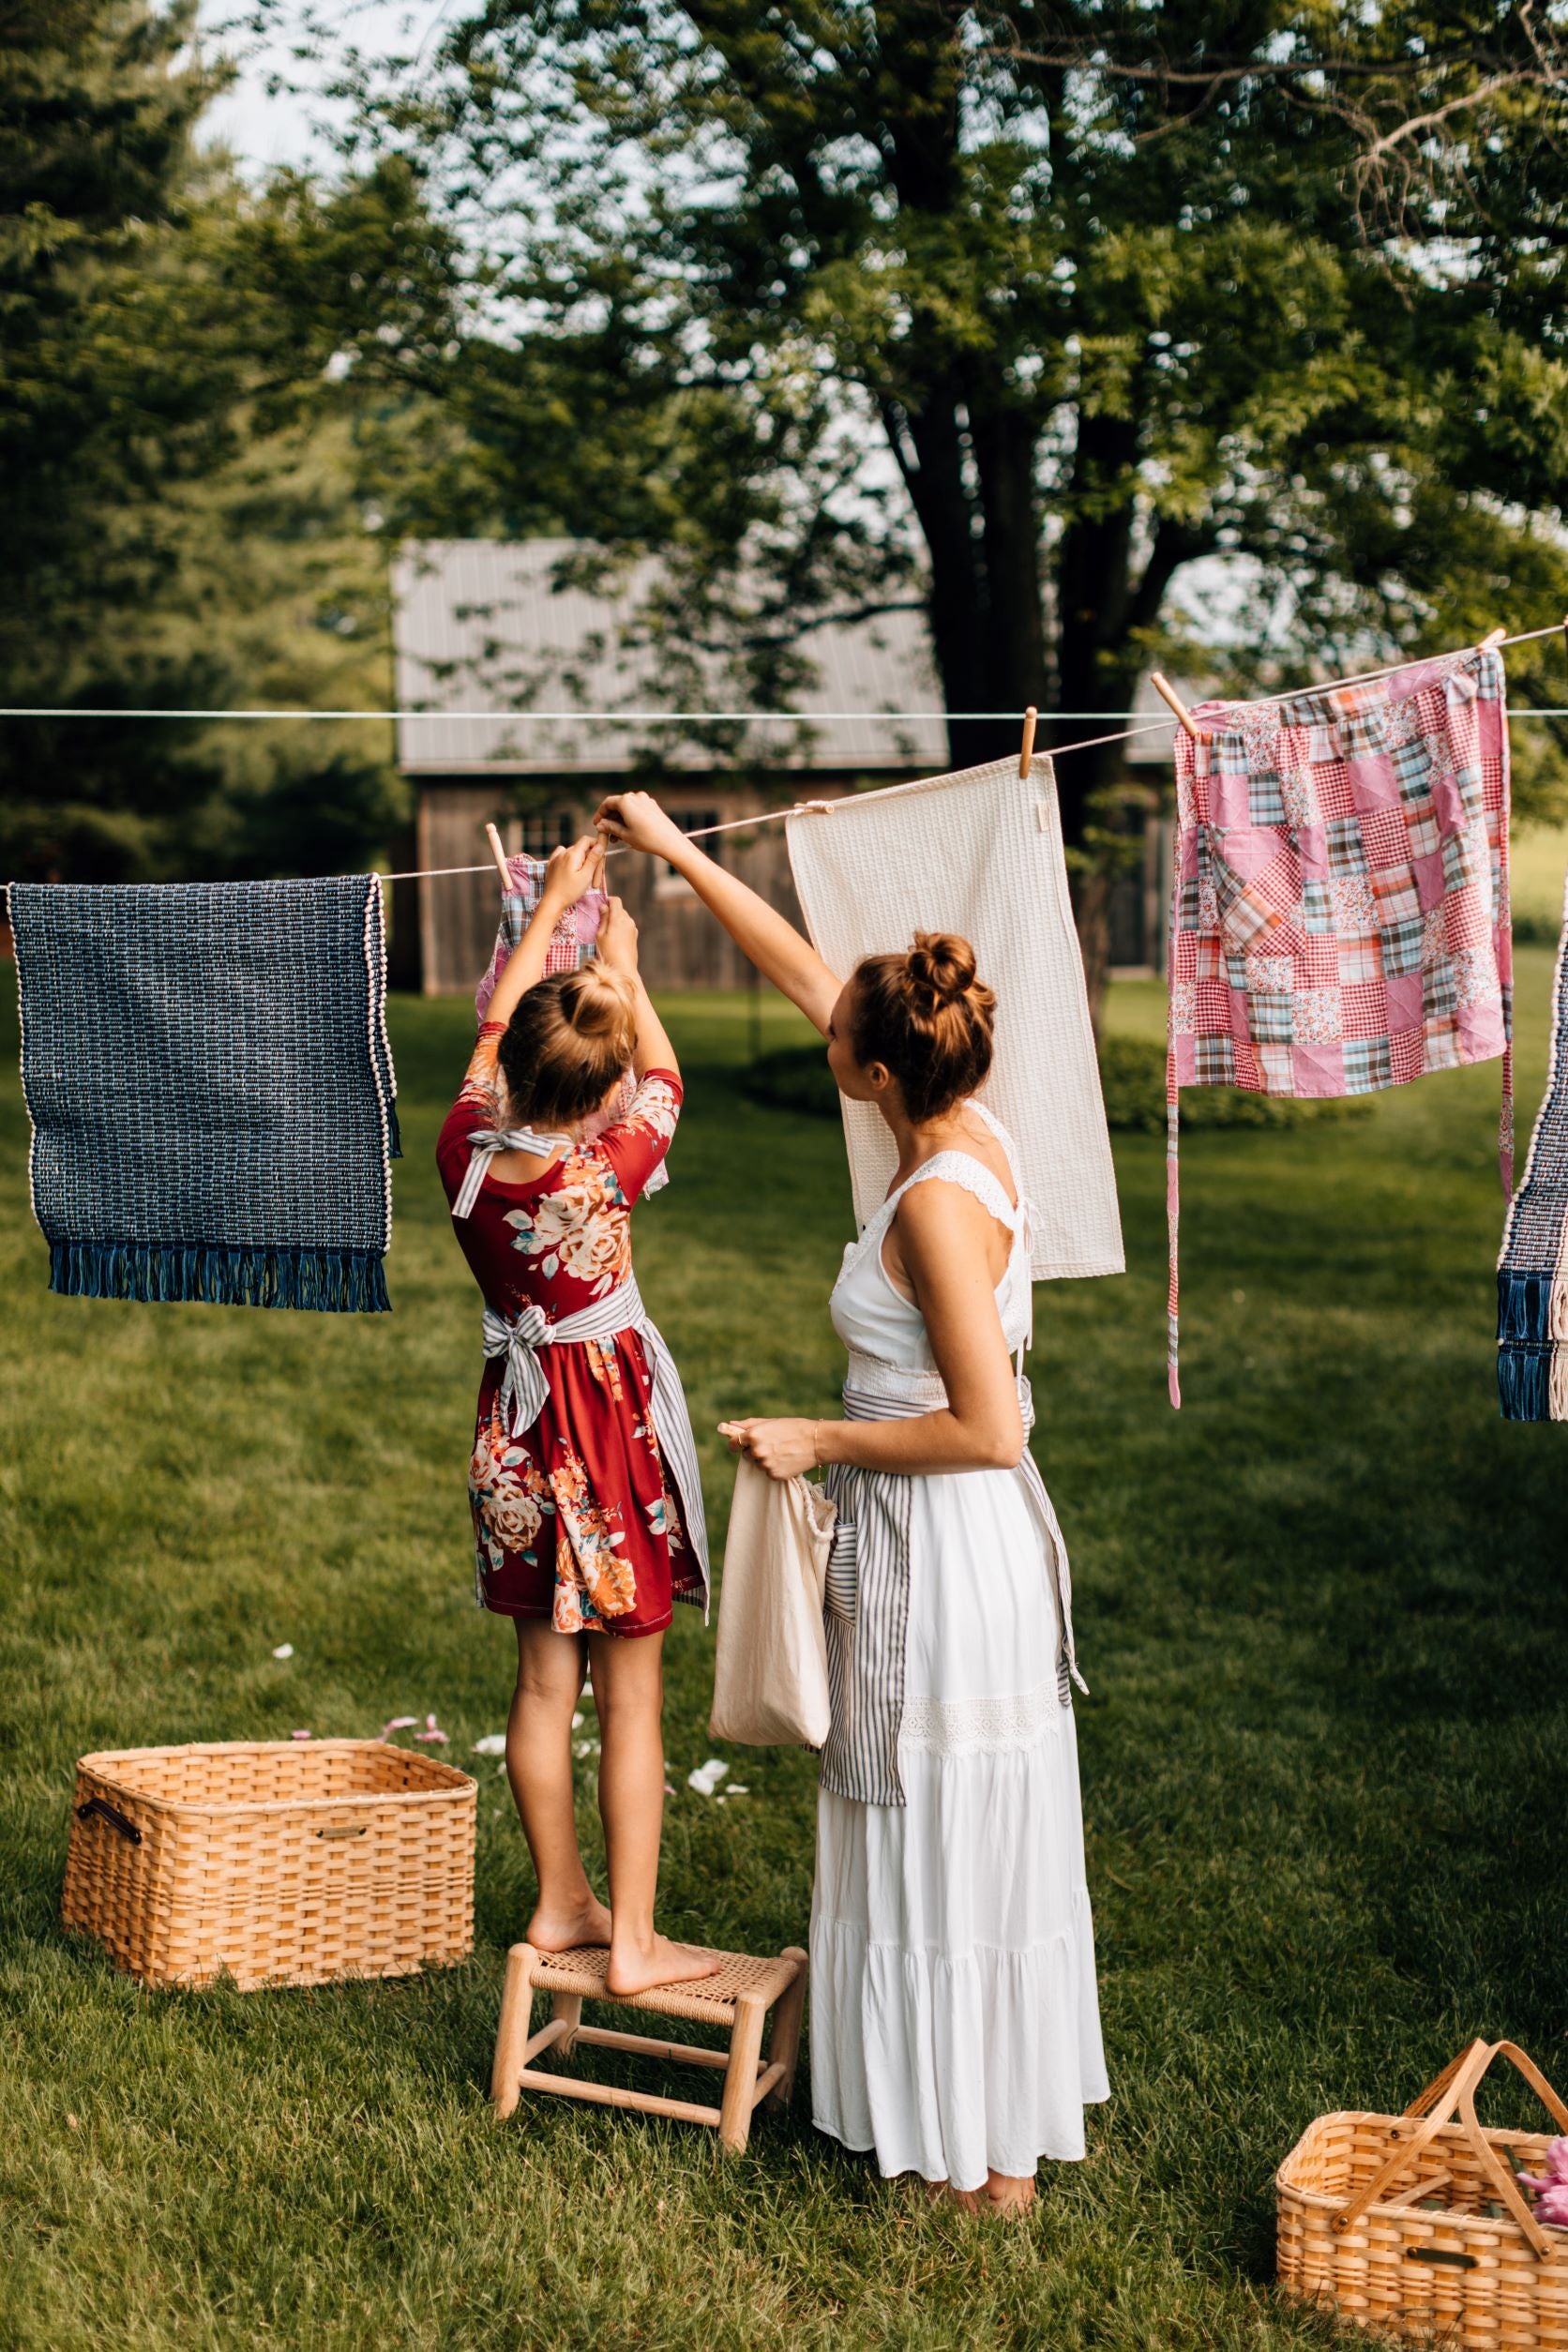 The Child's Quilted Patchwork Apron Hanging on a Clothesline